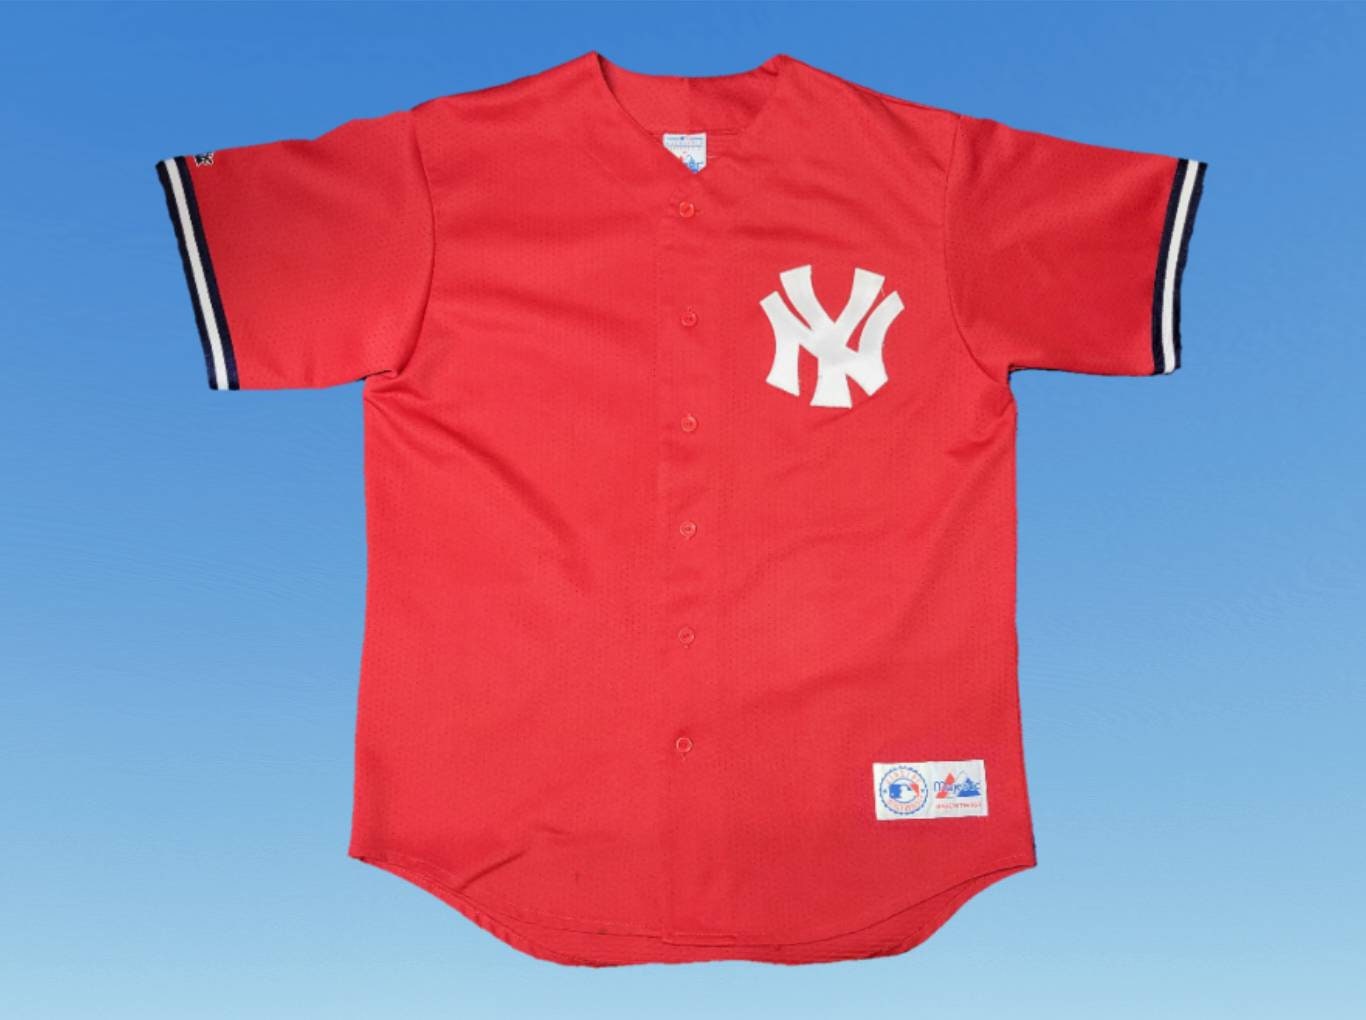 Vintage 1990s Majestic New York Yankees Jersey Red Blank Back MLB Baseball Uniform Size Large Made in USA (A6)